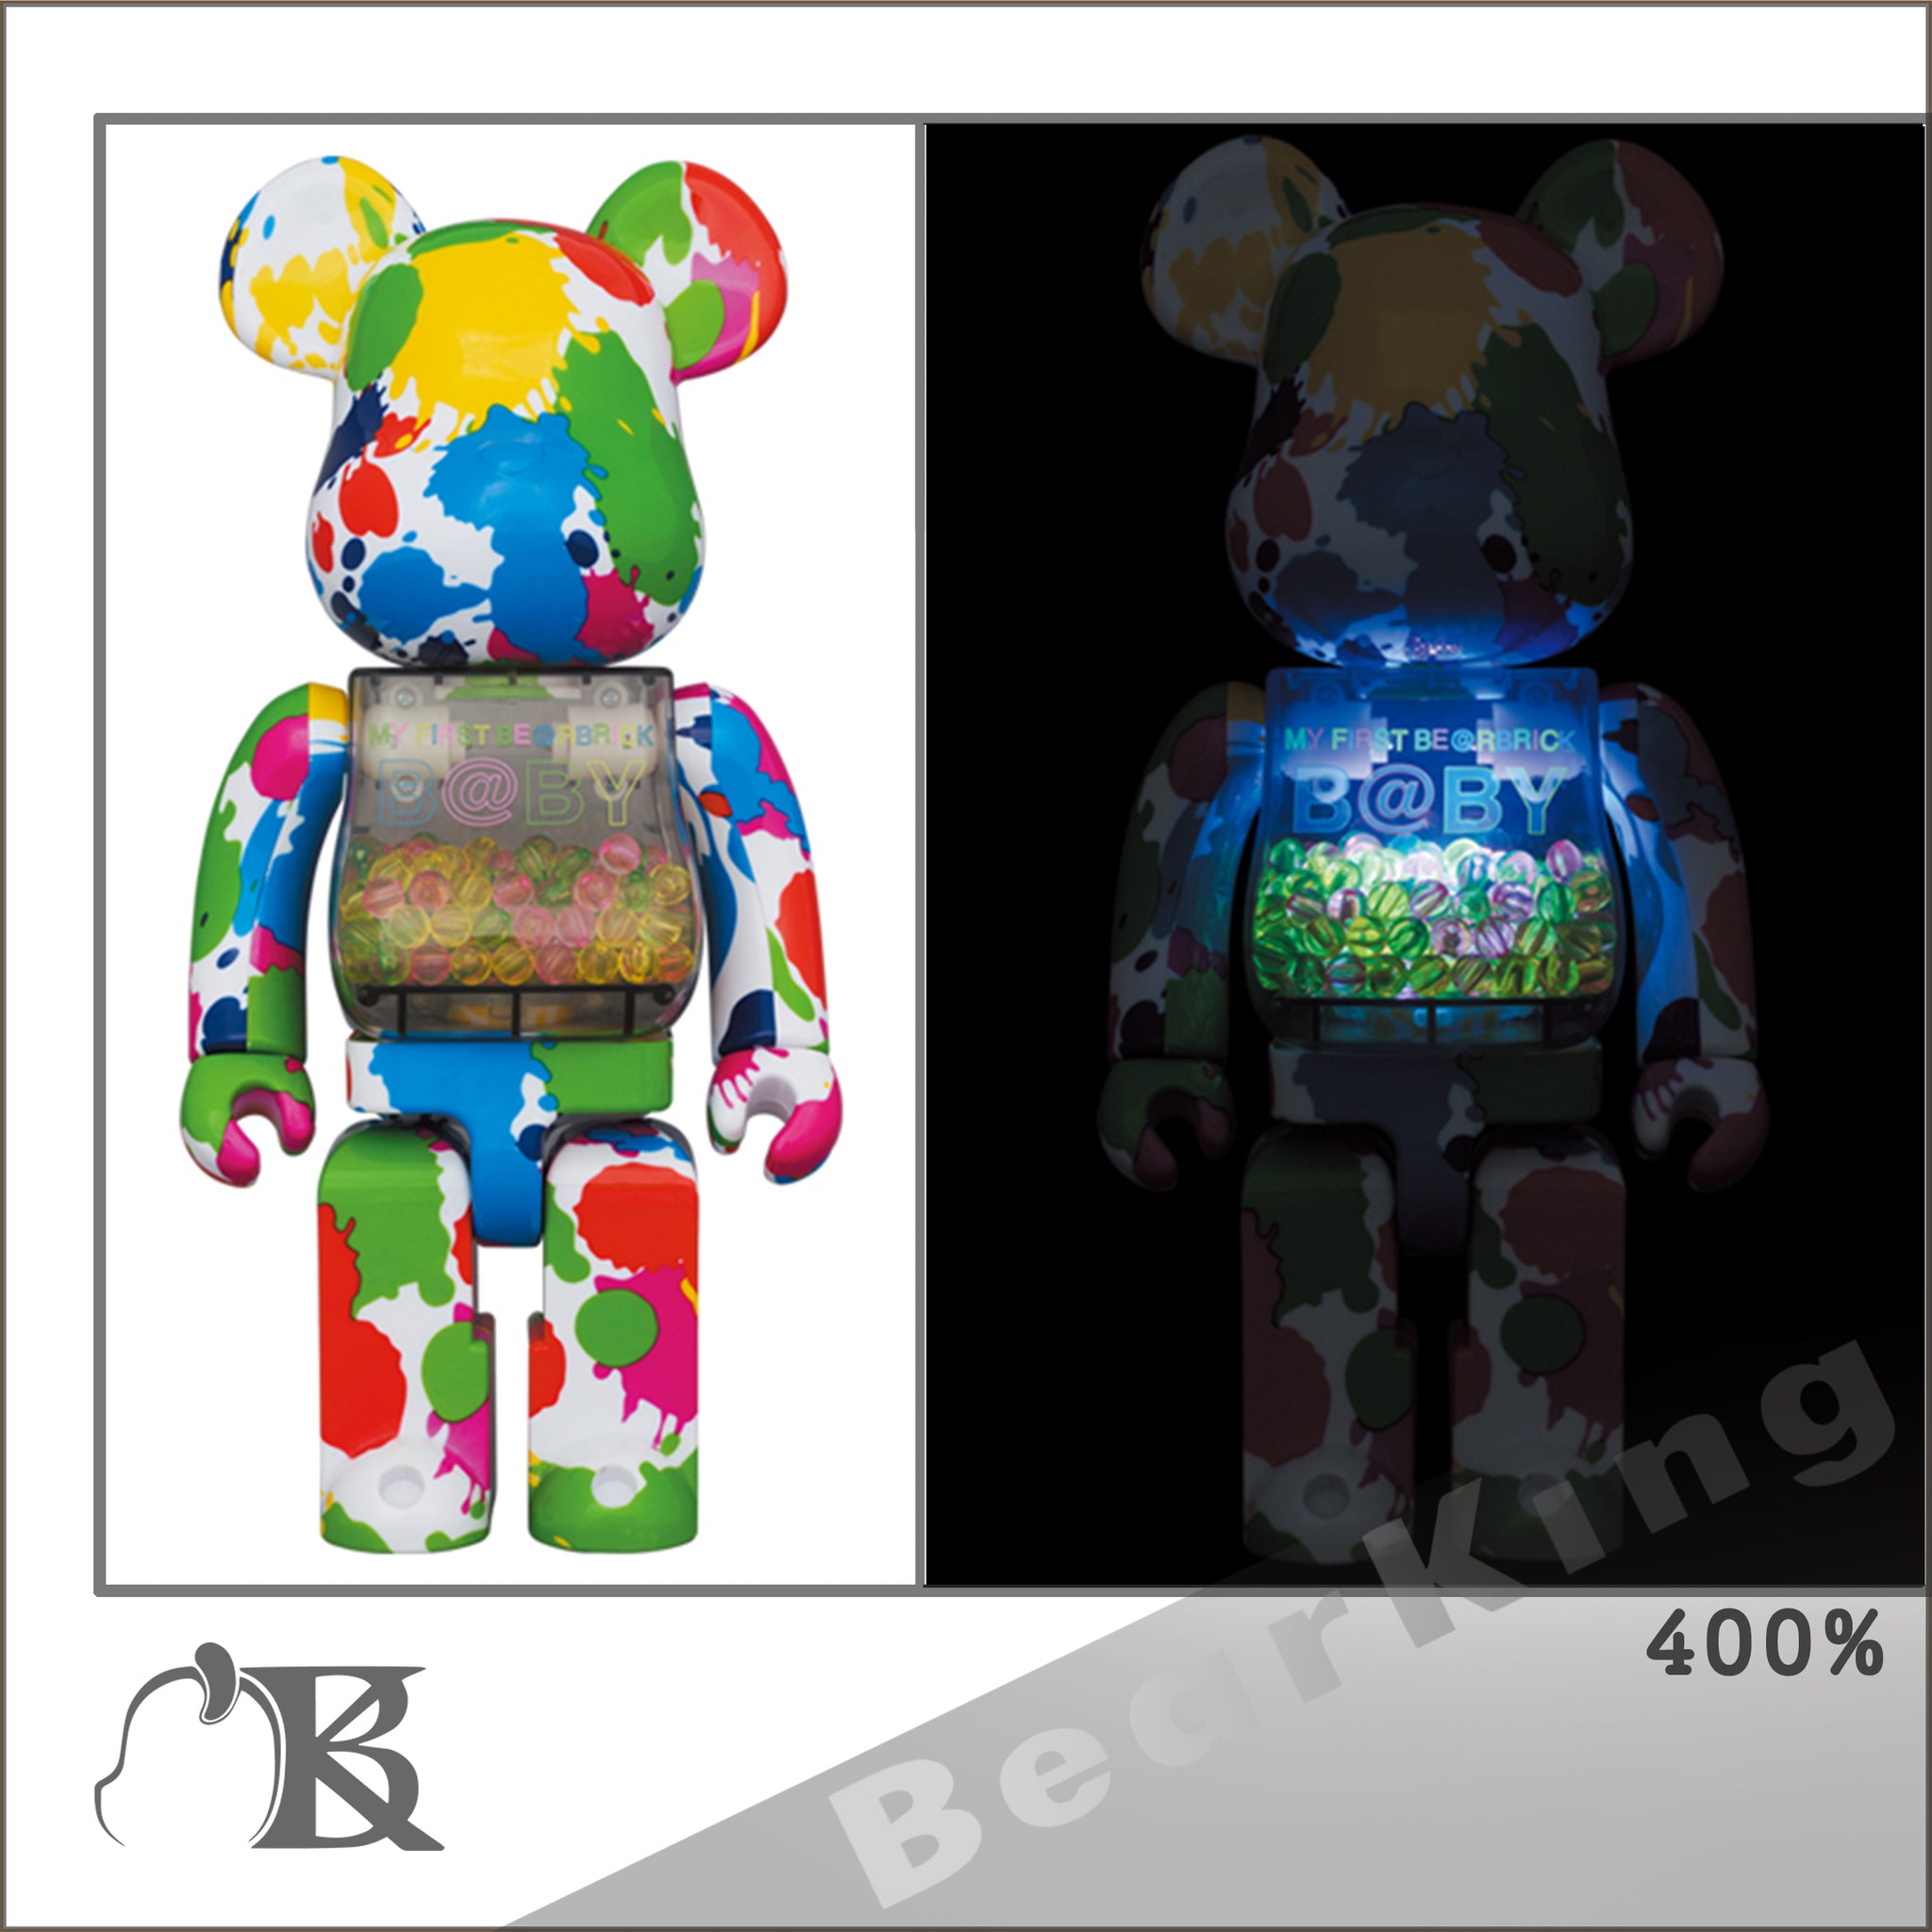 MY FIRST BE@RBRICK B@BY CLEAR BLACK CHROME Ver. 100％ & 400％ Baby 